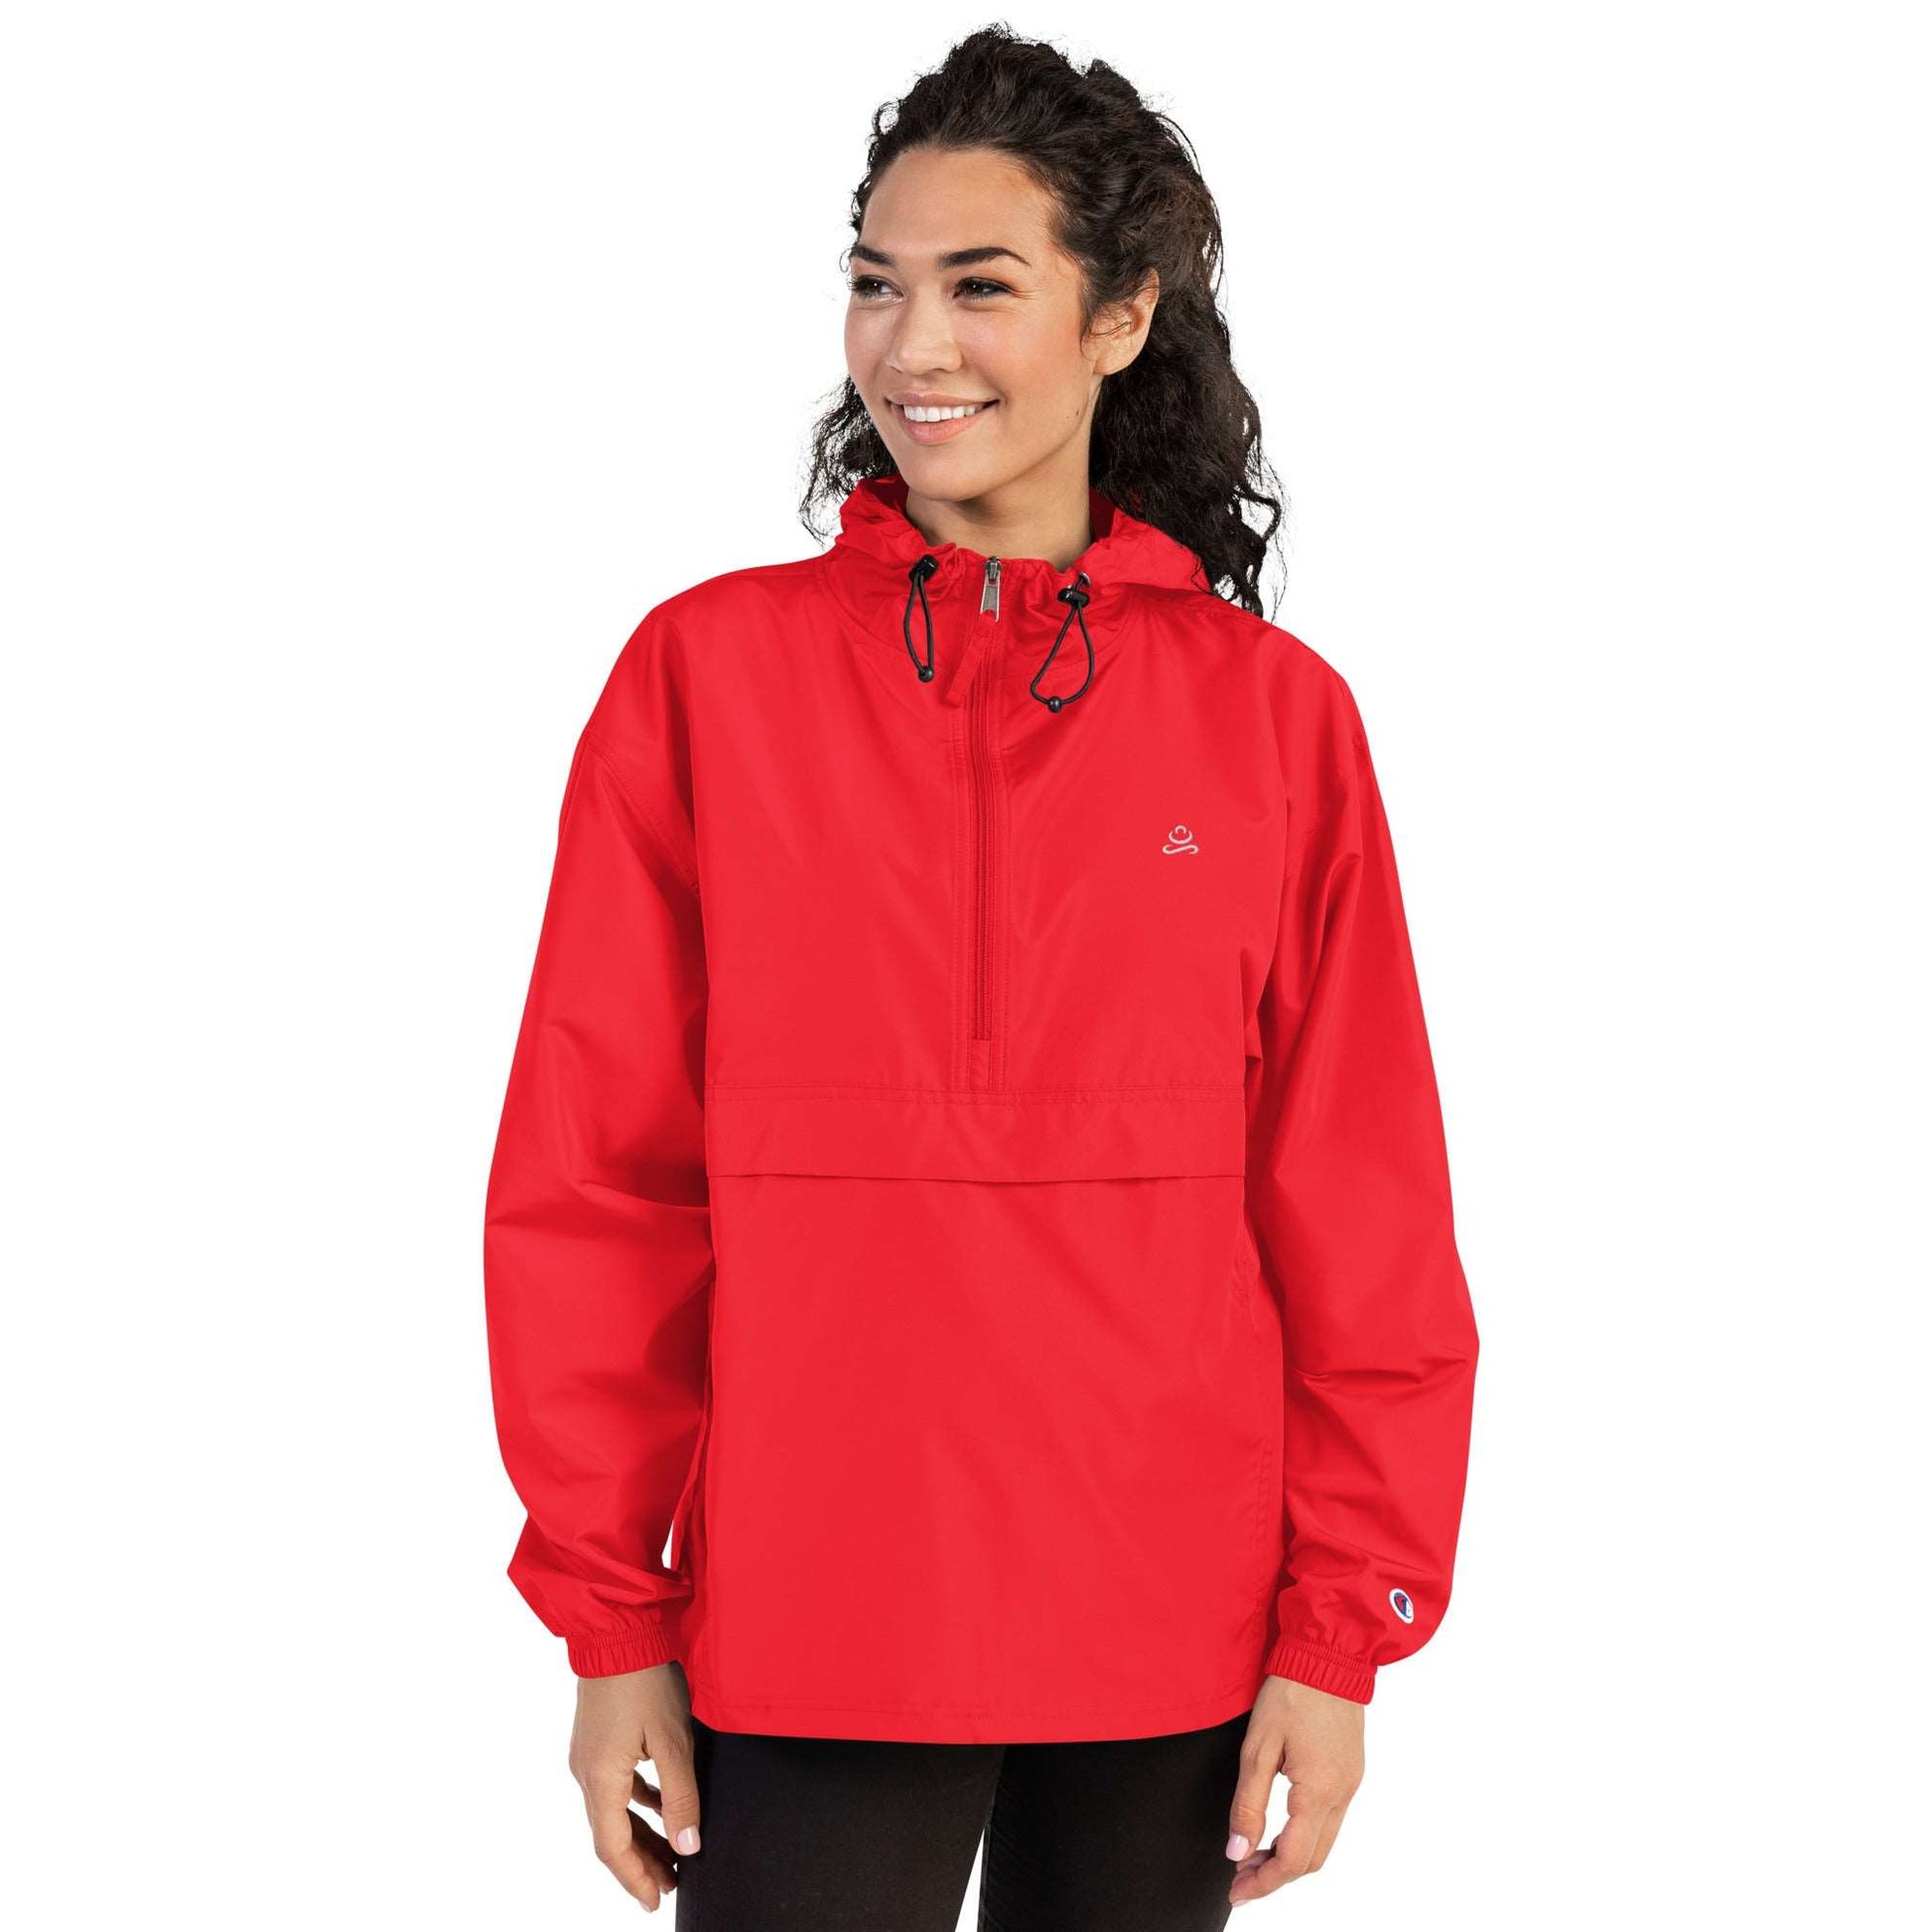 Scarlet Embroidered Champion Packable Jacket by Jain Yoga sold by Jain Yoga